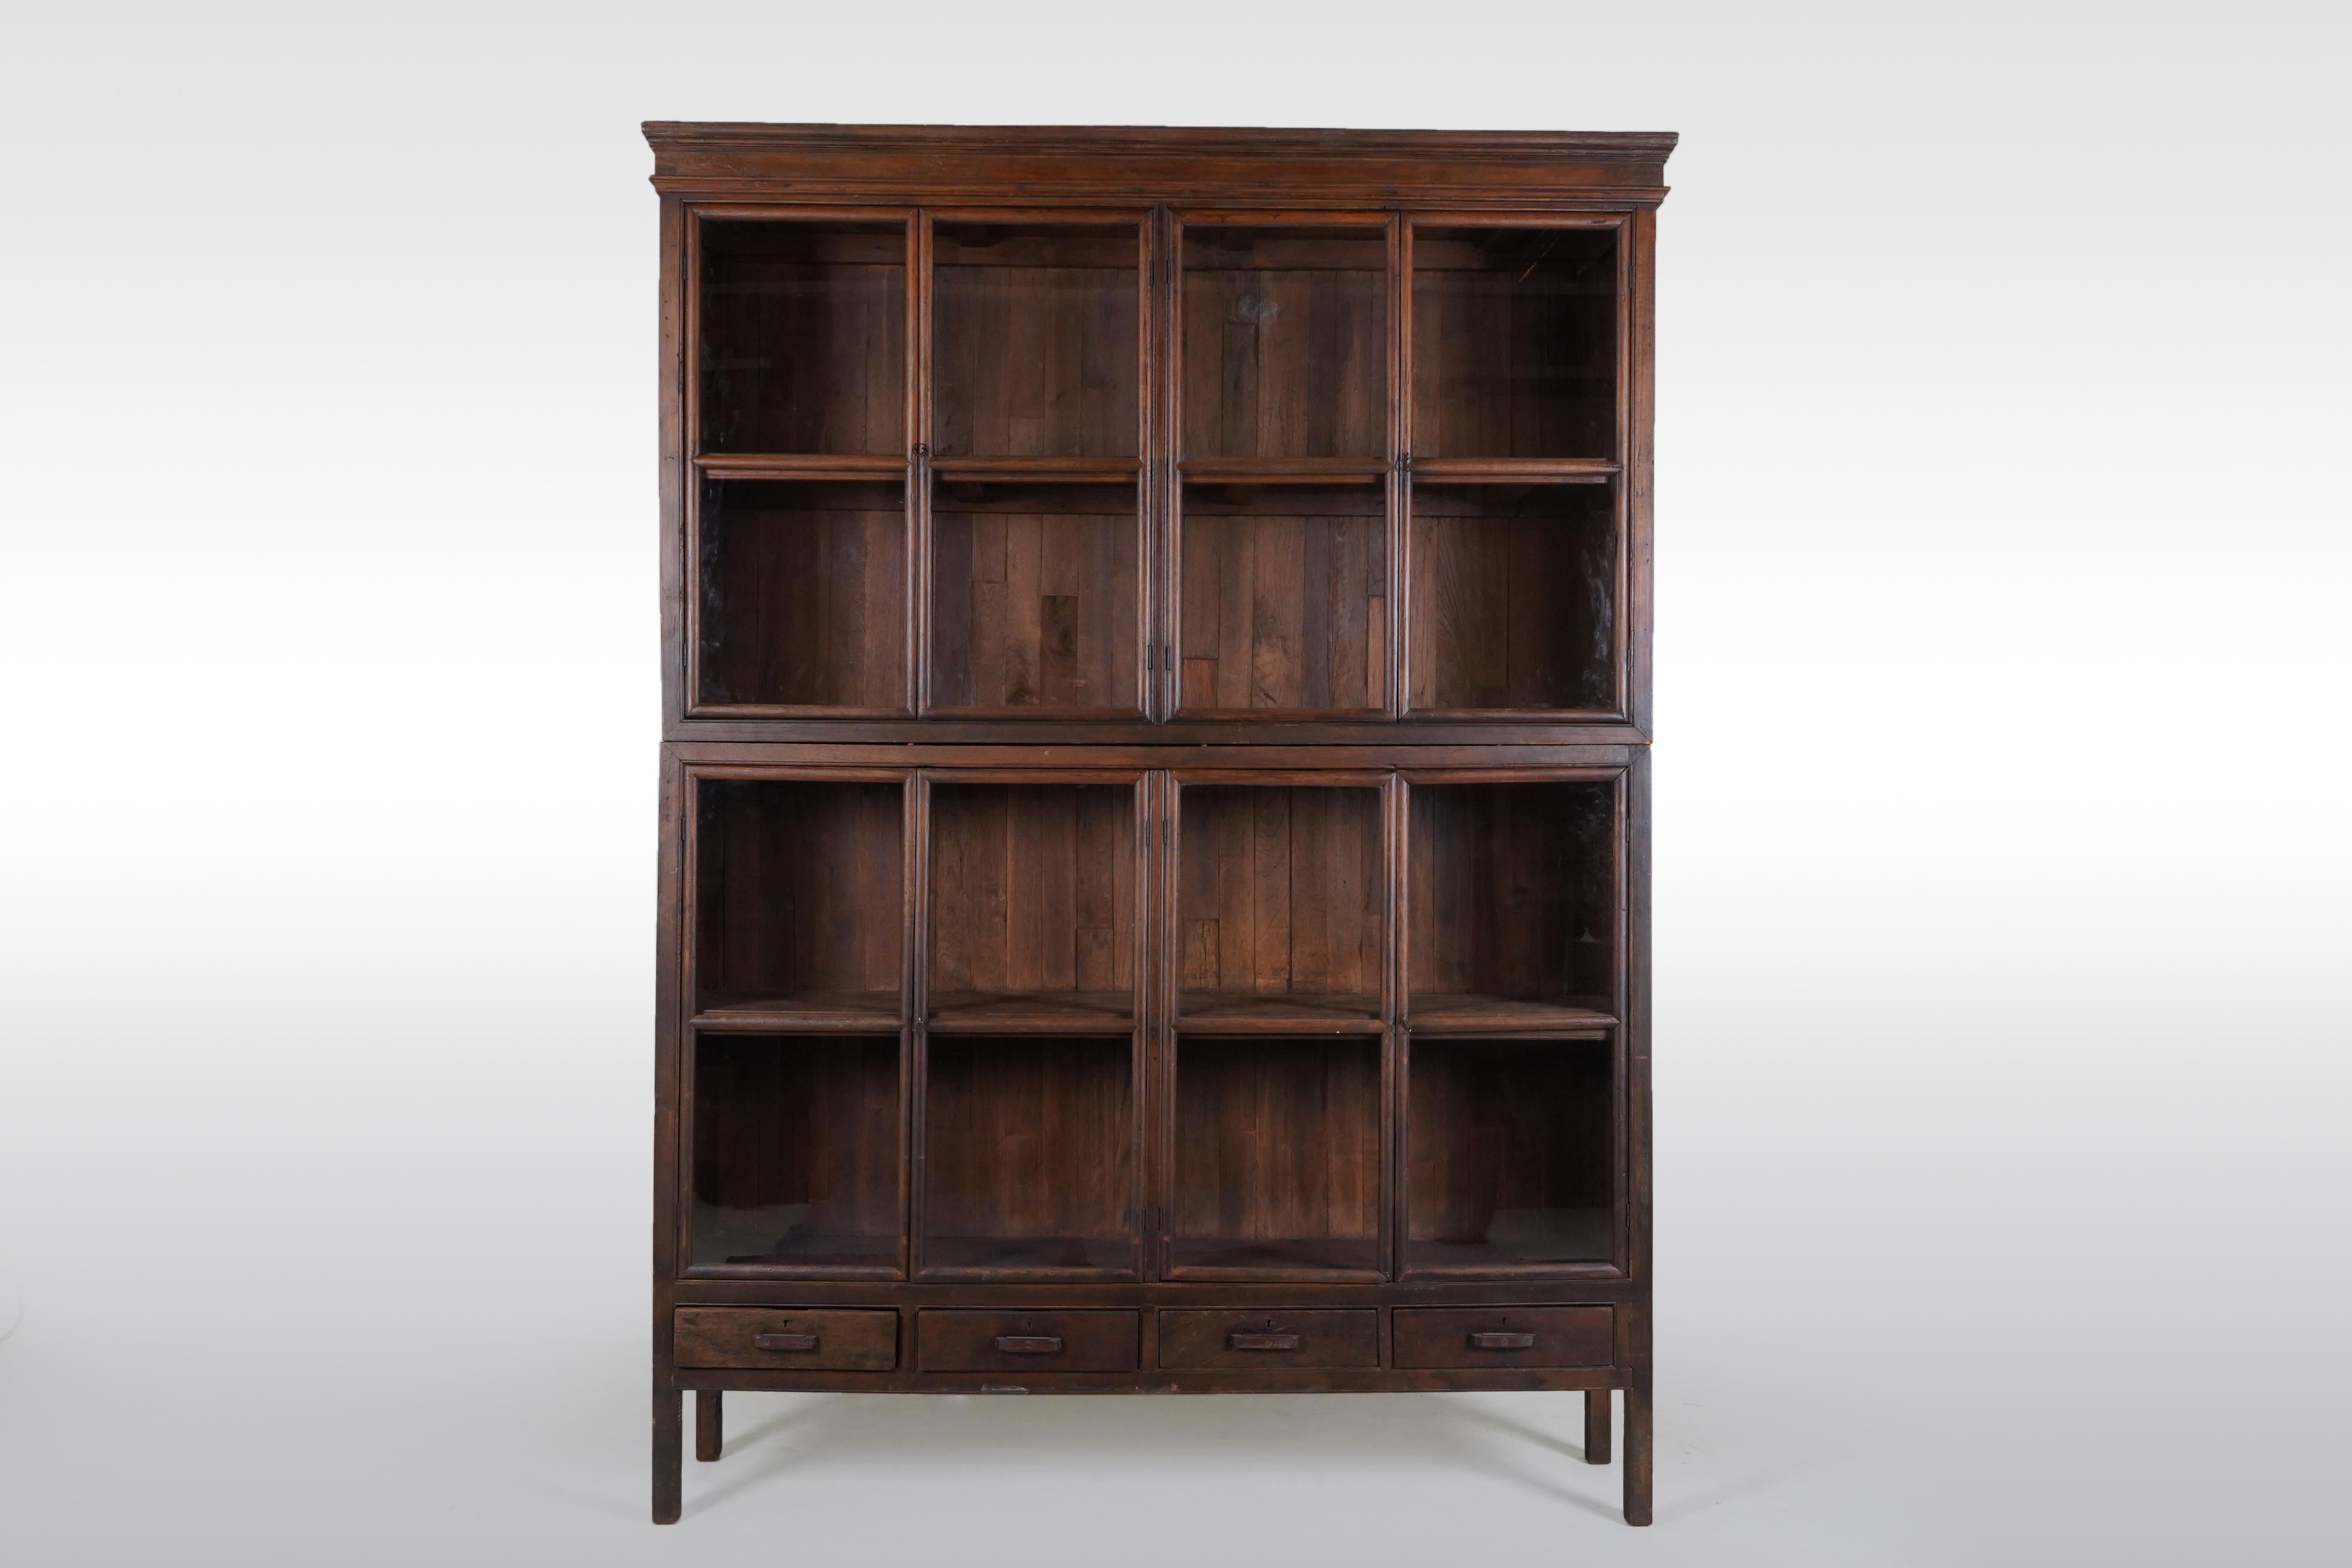 This large antique book cabinet was made from solid teak wood and dates to the early 1900's. During the British Empire in India and Burma much furniture was made in the Anglo-Indian style using native hardwoods and native craftsmen. Styles closely